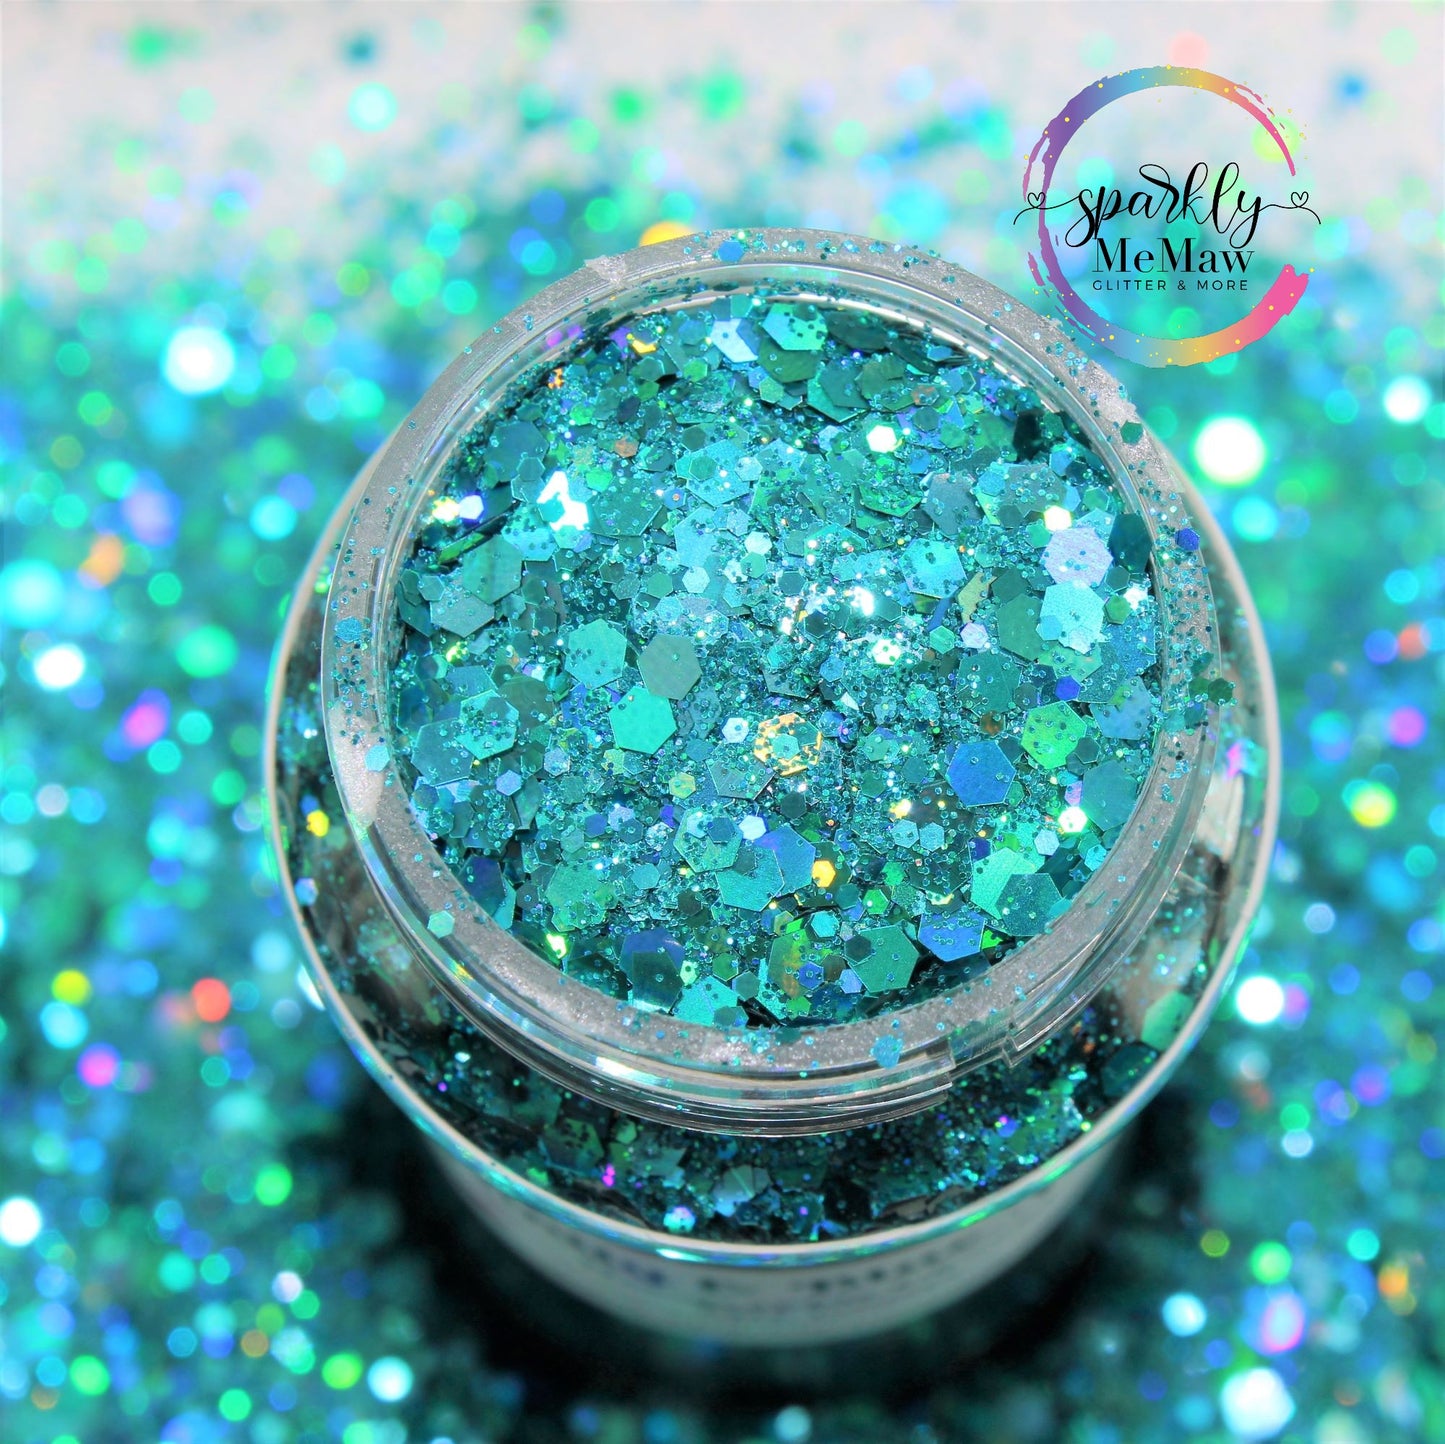 Infinity & Blue-Yond Chunky Holographic Glitter